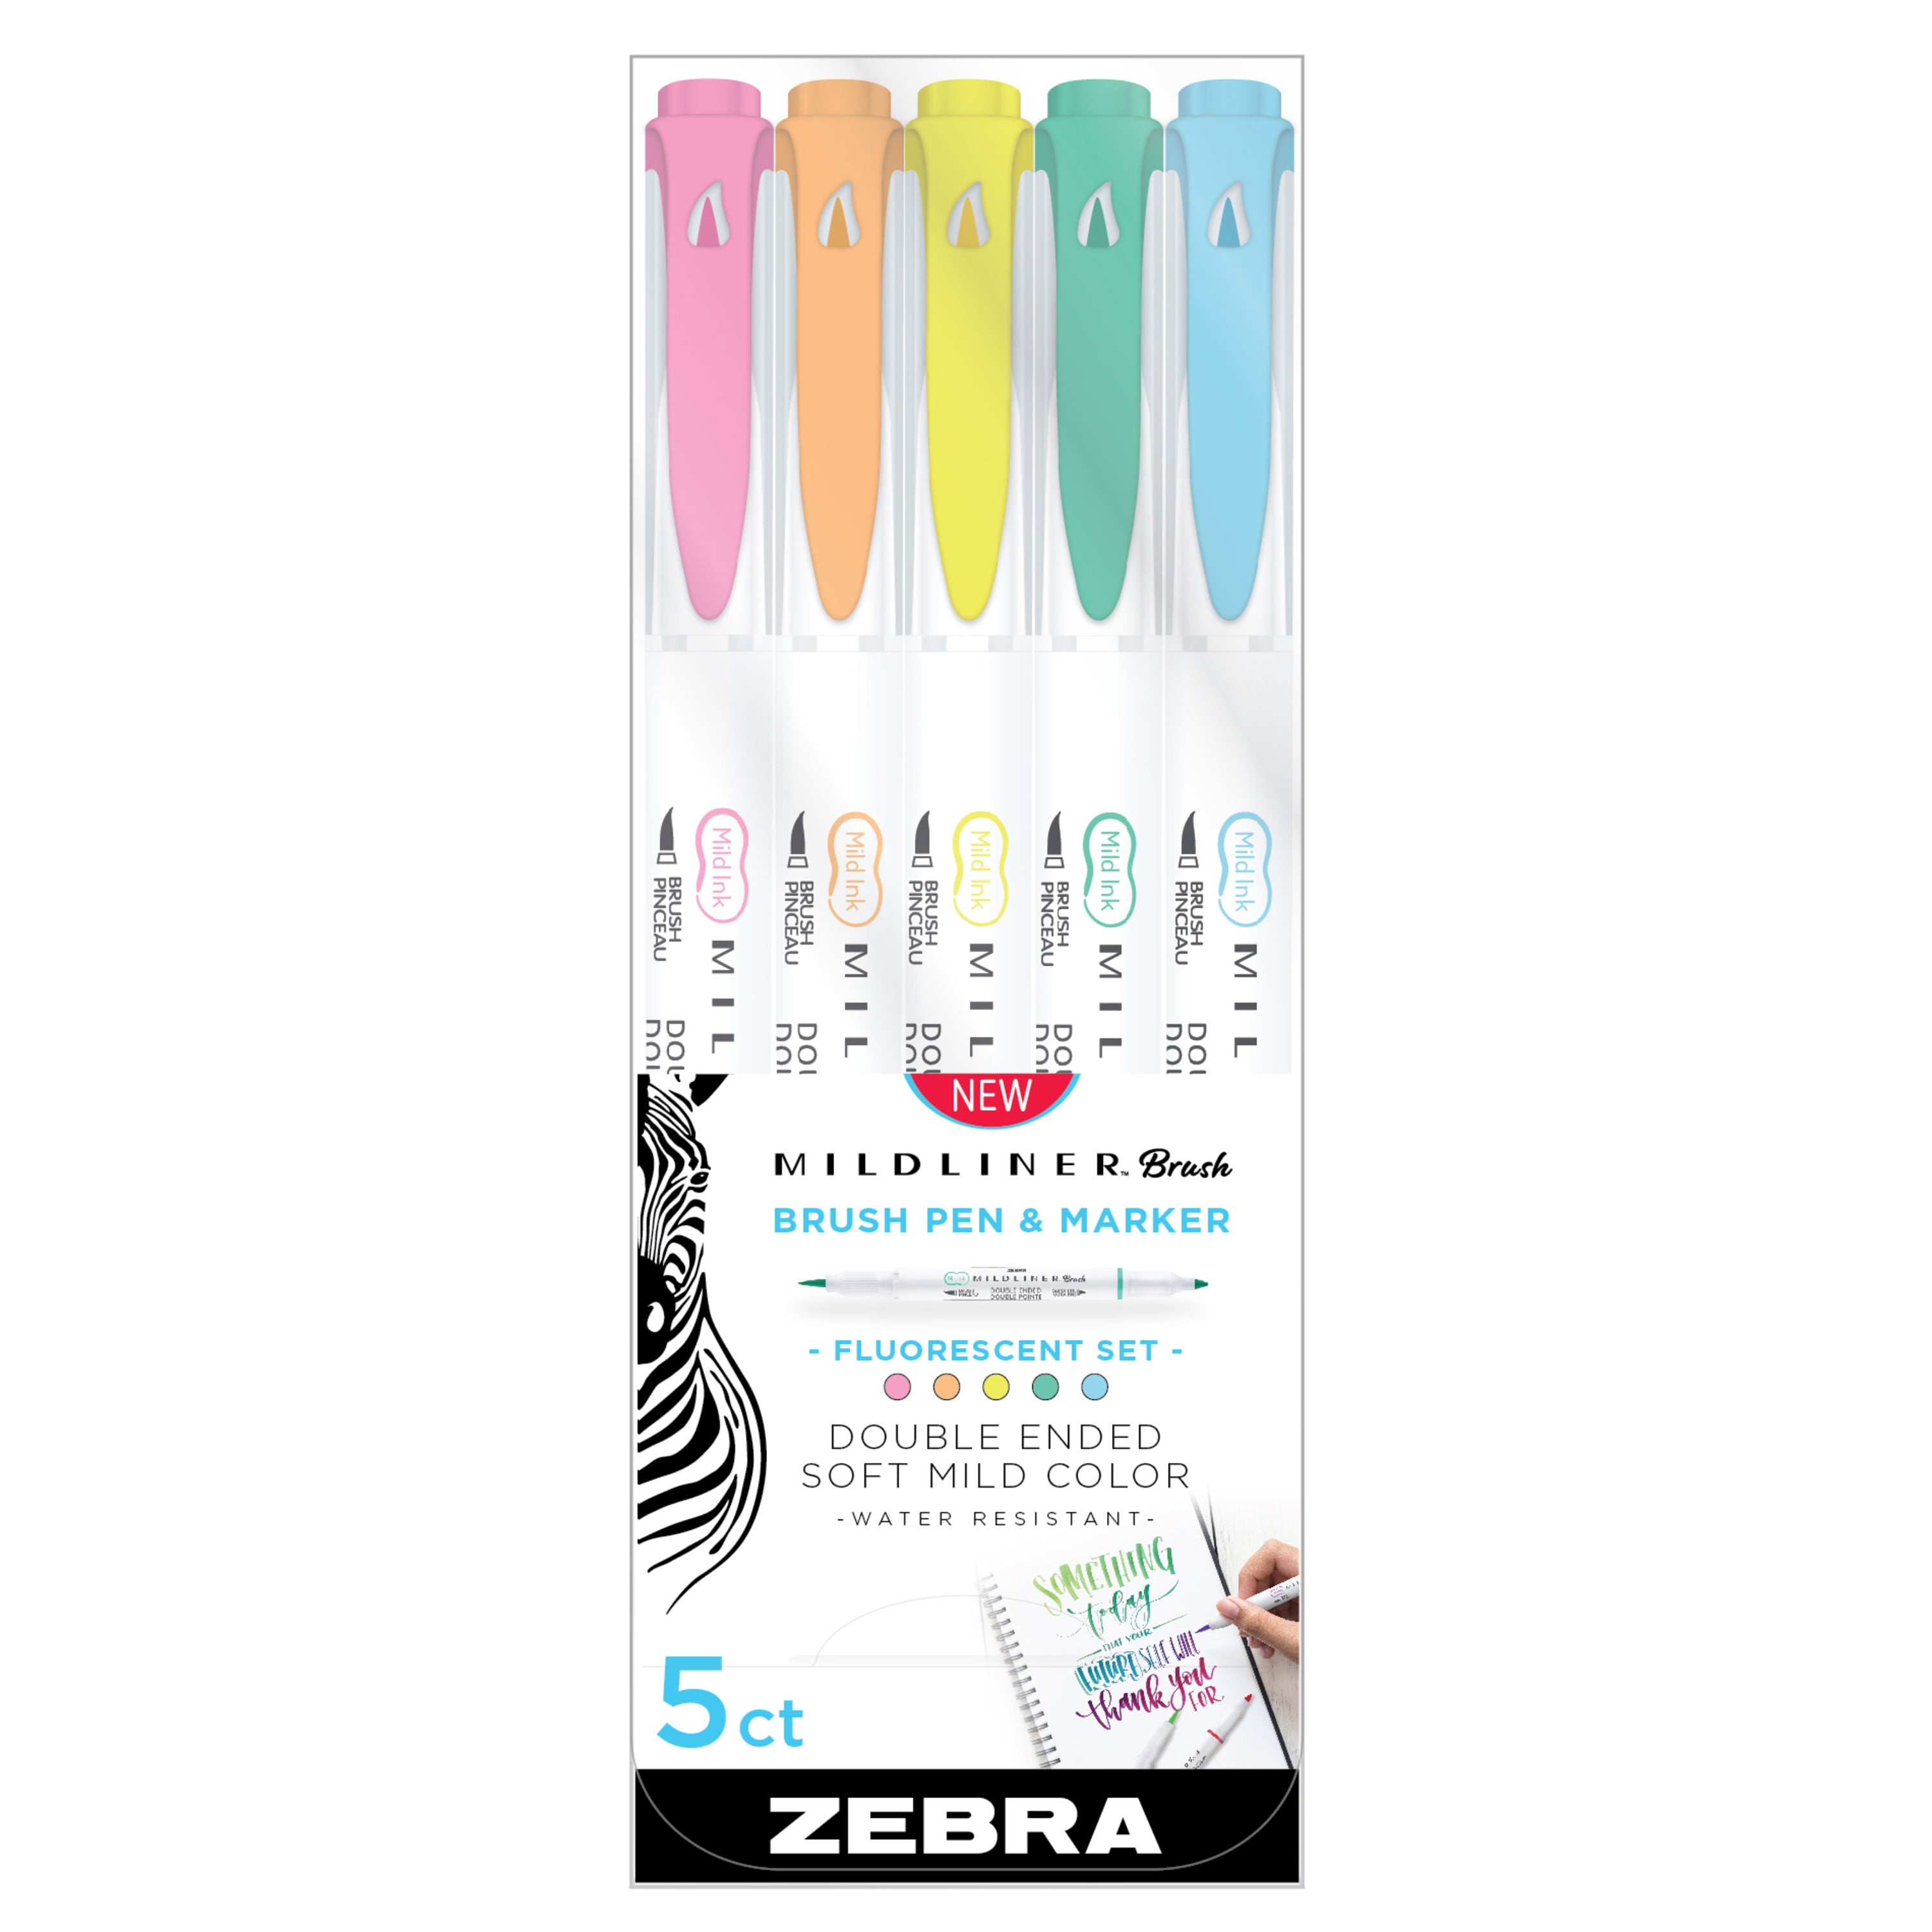  Zebra Pen Mildliner Double Ended Brush Pen, Brush Tips,  Assorted Ink Colors, 25-Pack, Multicolor (79125) - (Case of 36 packs, 900  Count Total) : Office Products